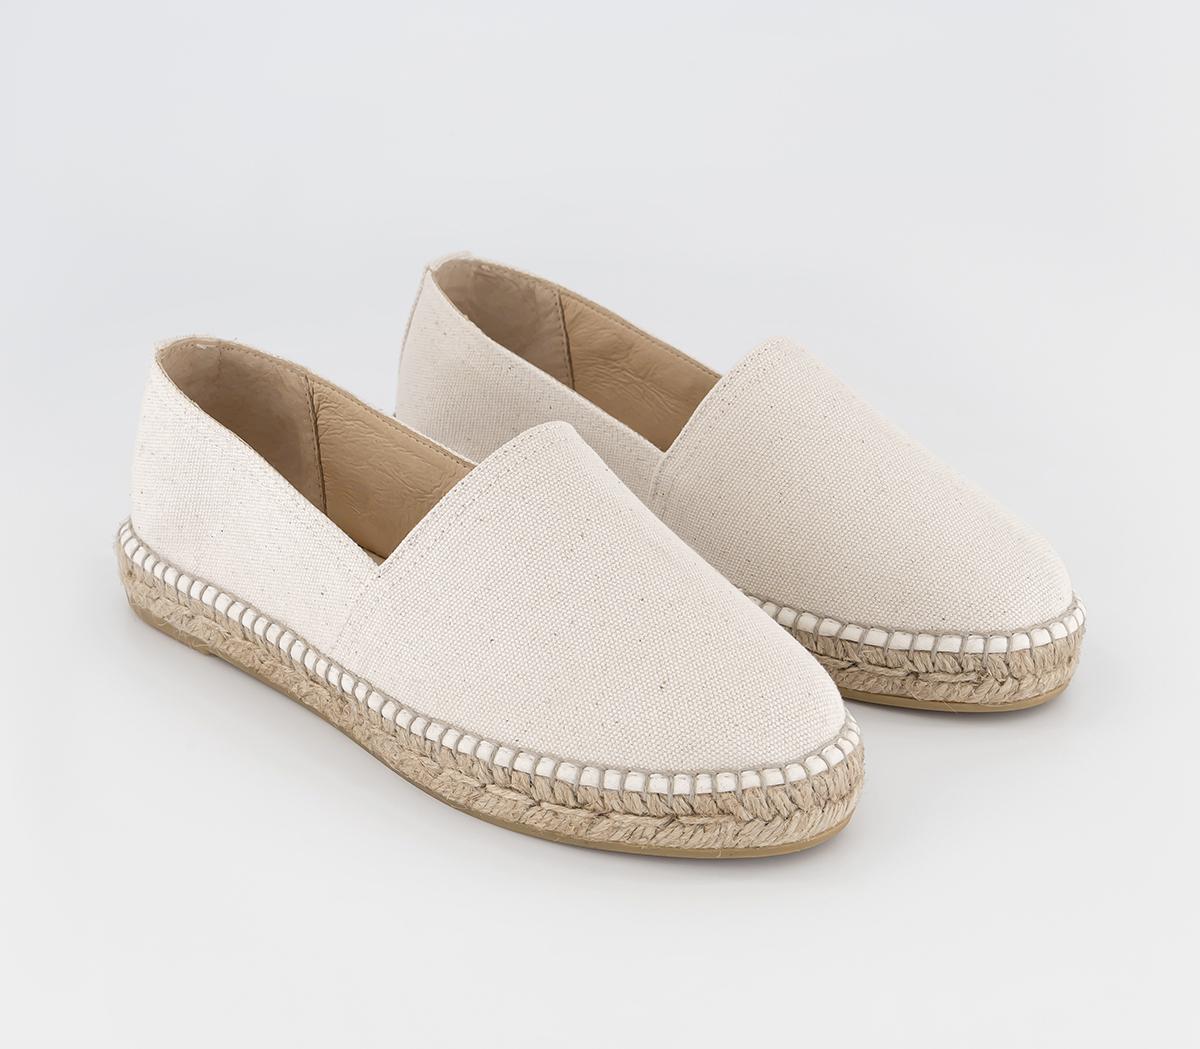 Gaimo For Office Womens Camping Slip On Espadrilles Cream Canvas, 4